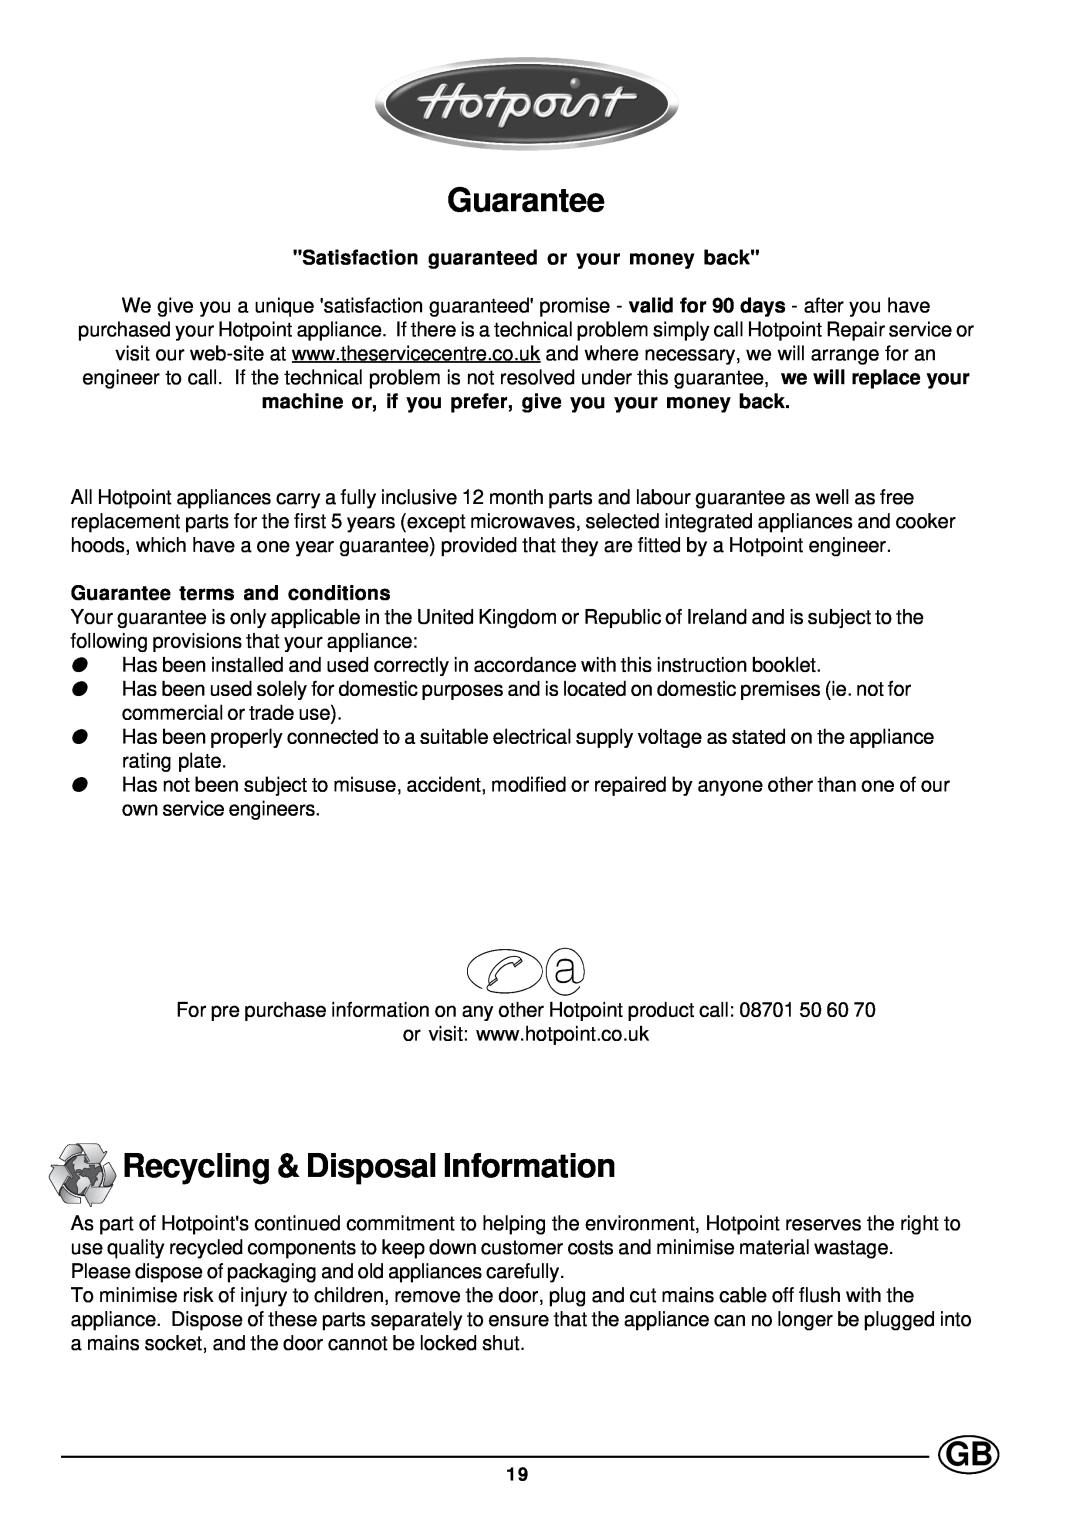 Hotpoint SD97 manual Guarantee, Recycling & Disposal Information, Satisfaction guaranteed or your money back 